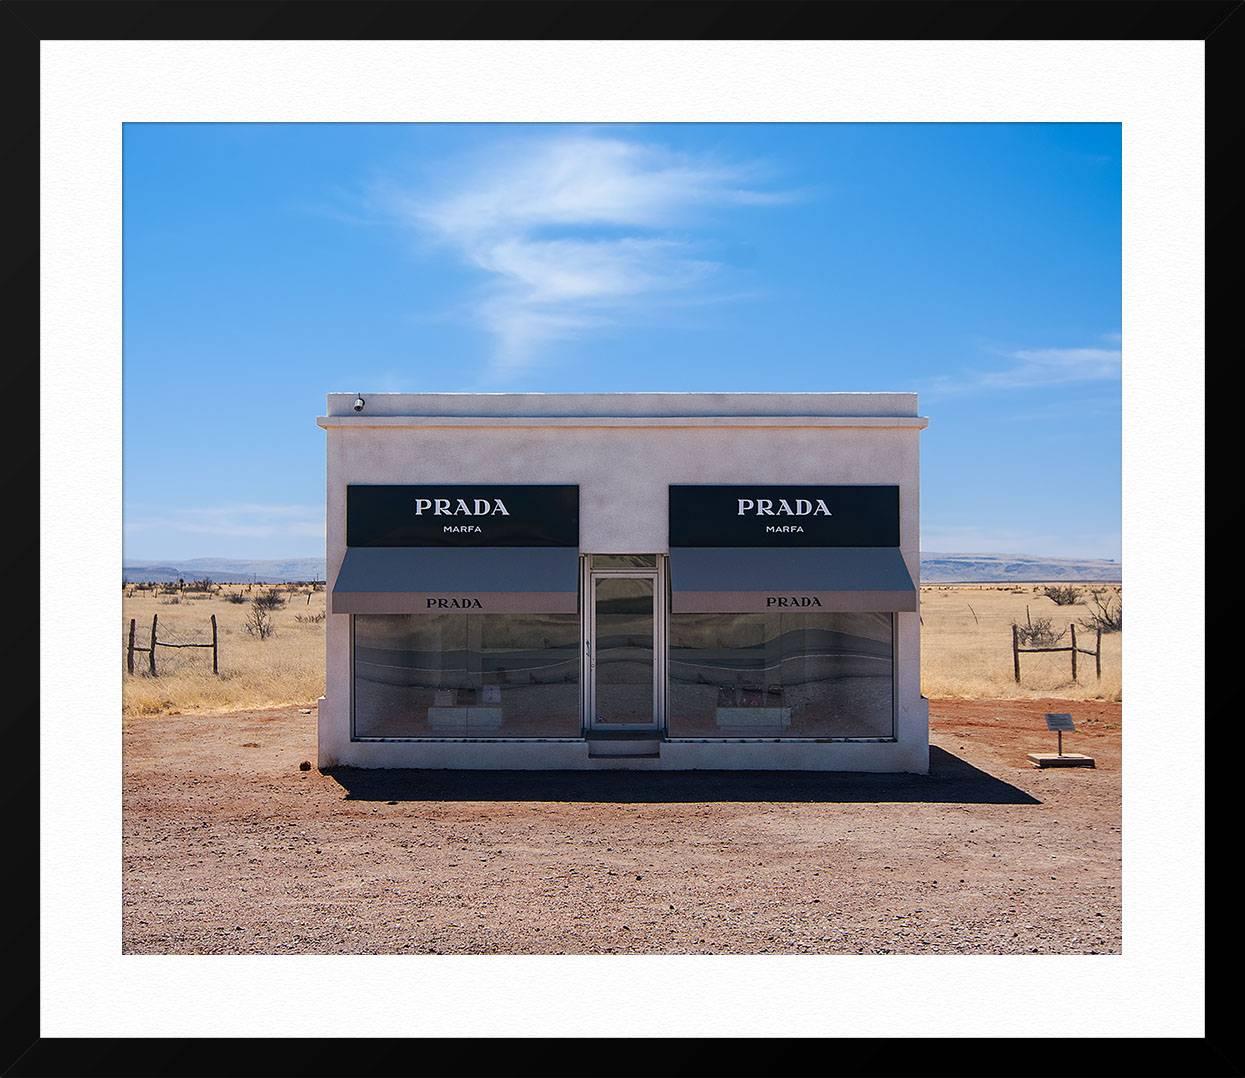 ABOUT THIS PIECE: Artists Elmgreen and Dragset created a faux Prada store on the highway outside of Marfa Texas .The sculpture was financed by the Art Production Fund and Ballroom Marfa, a center of contemporary art and culture. Miuccia Prada